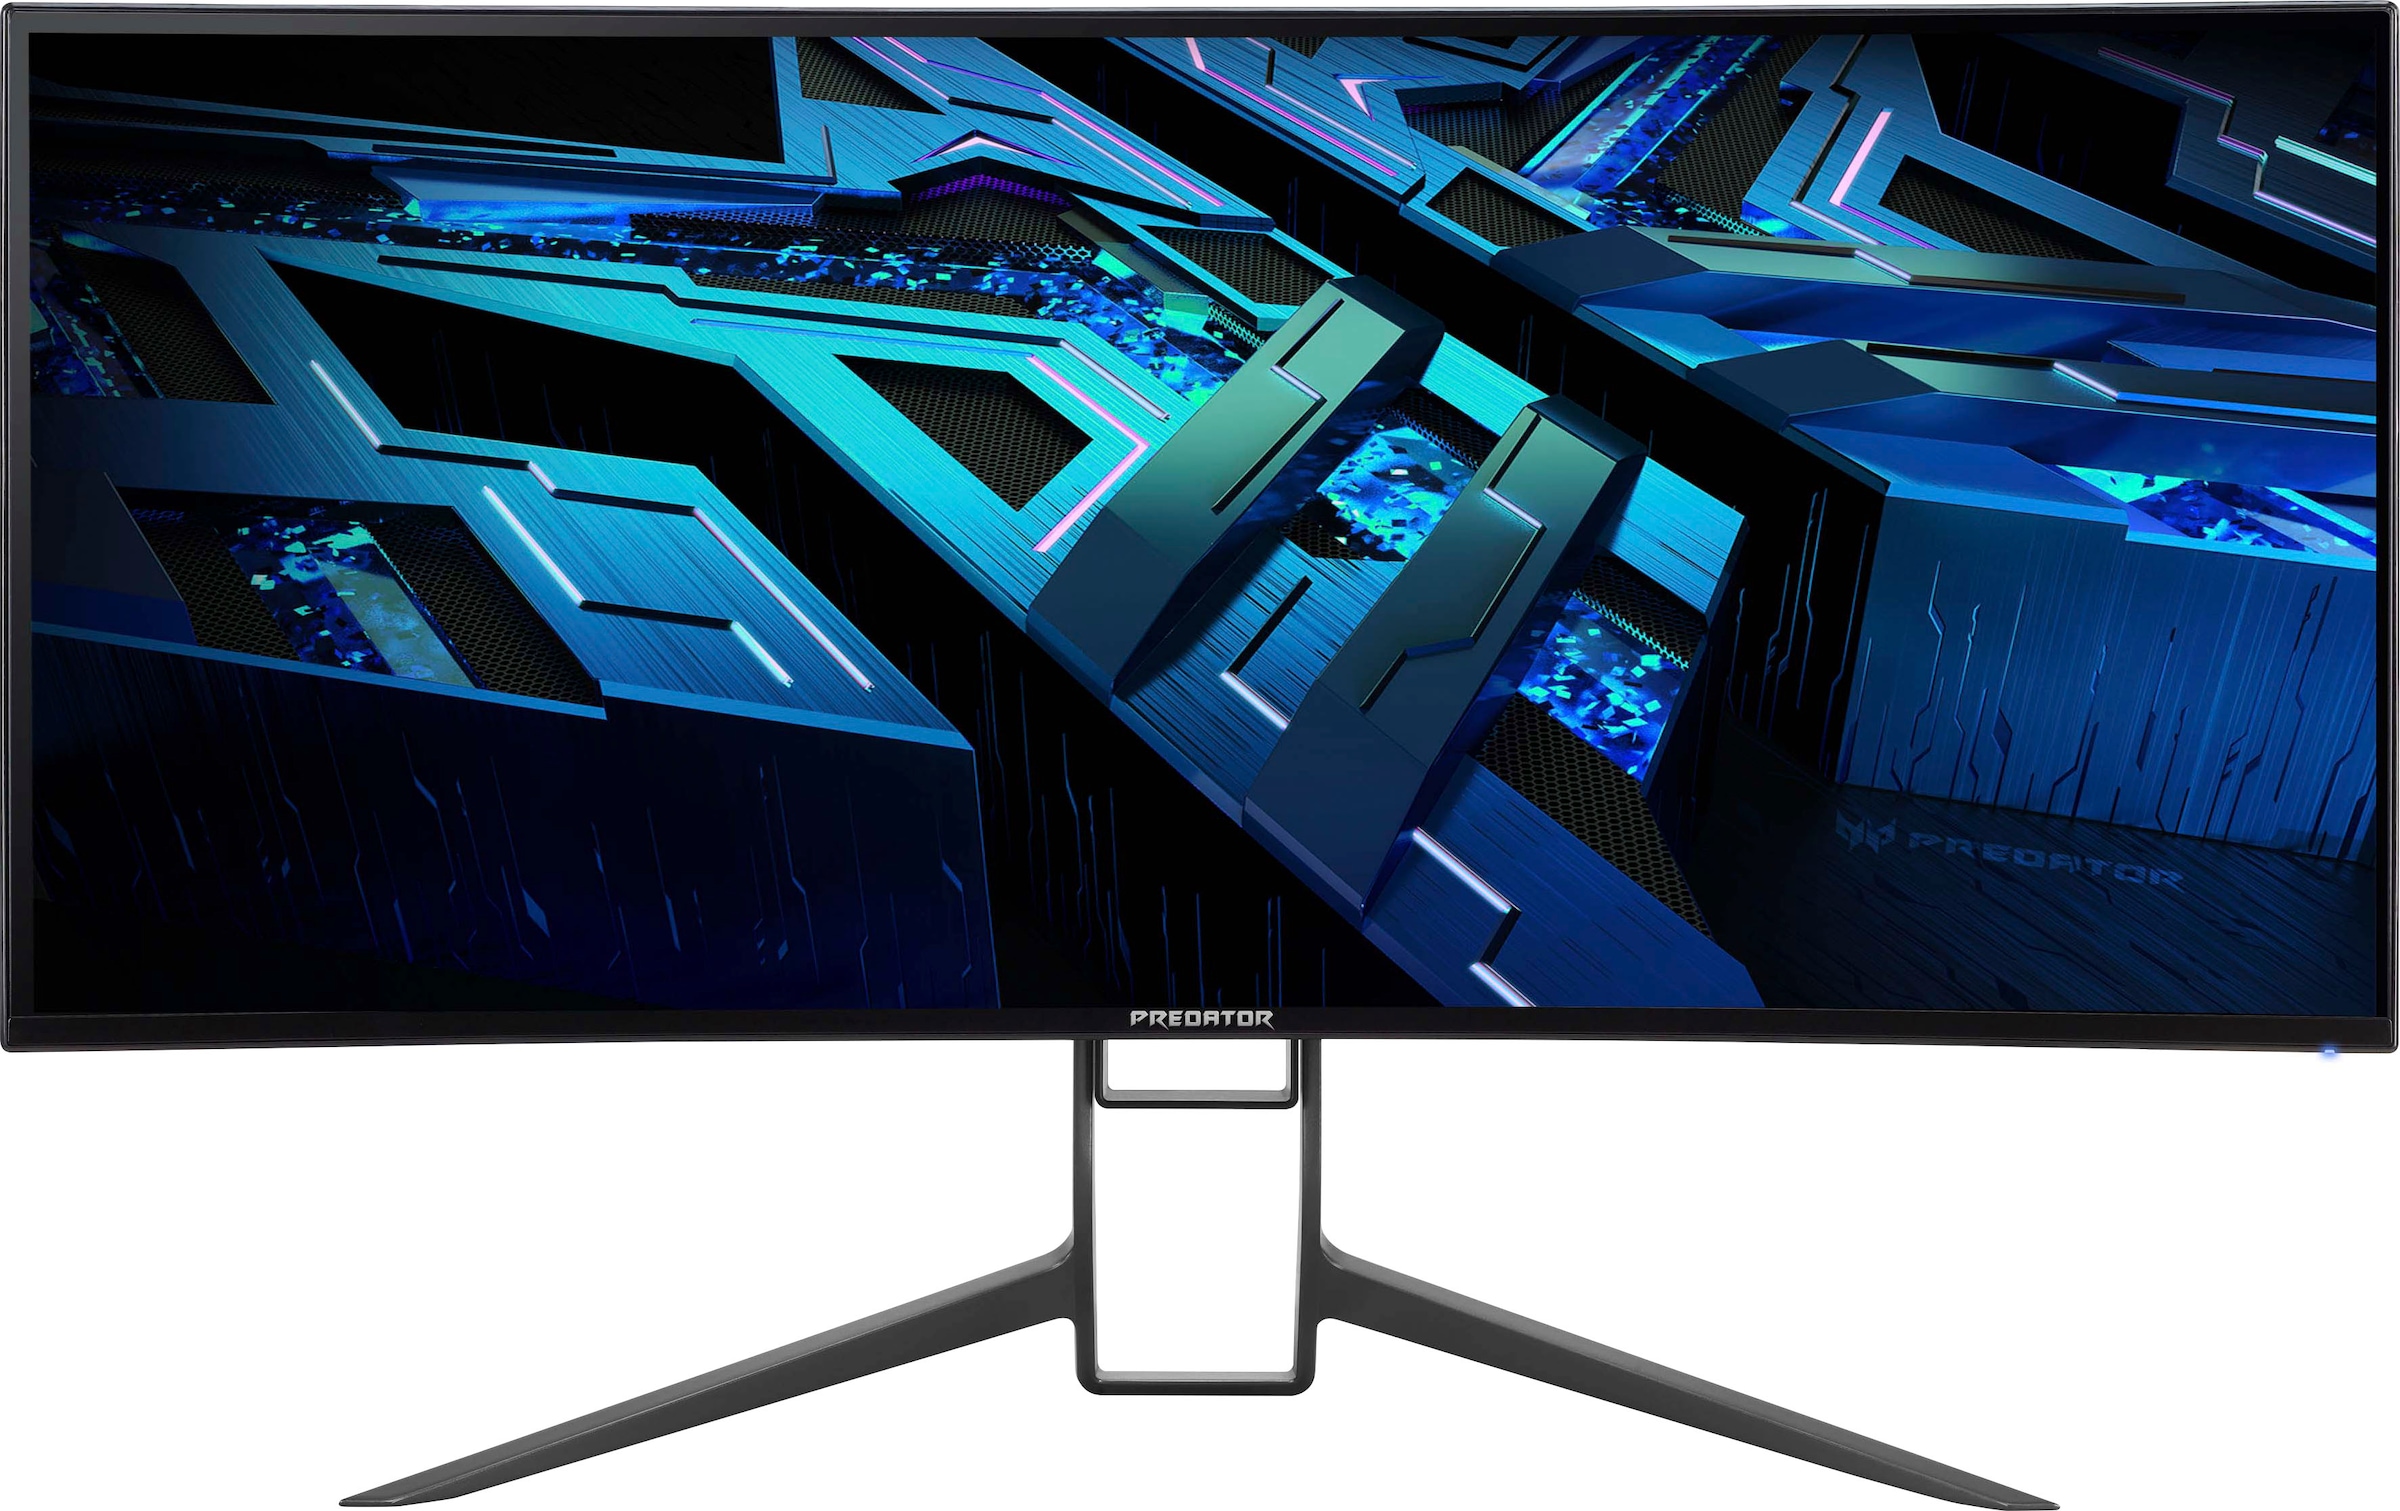 Acer Curved-Gaming-LED-Monitor »Predator X34GS«, 86,4 cm/34 Zoll, 3440 x 1440 px, 0,5 ms Reaktionszeit, 180 Hz